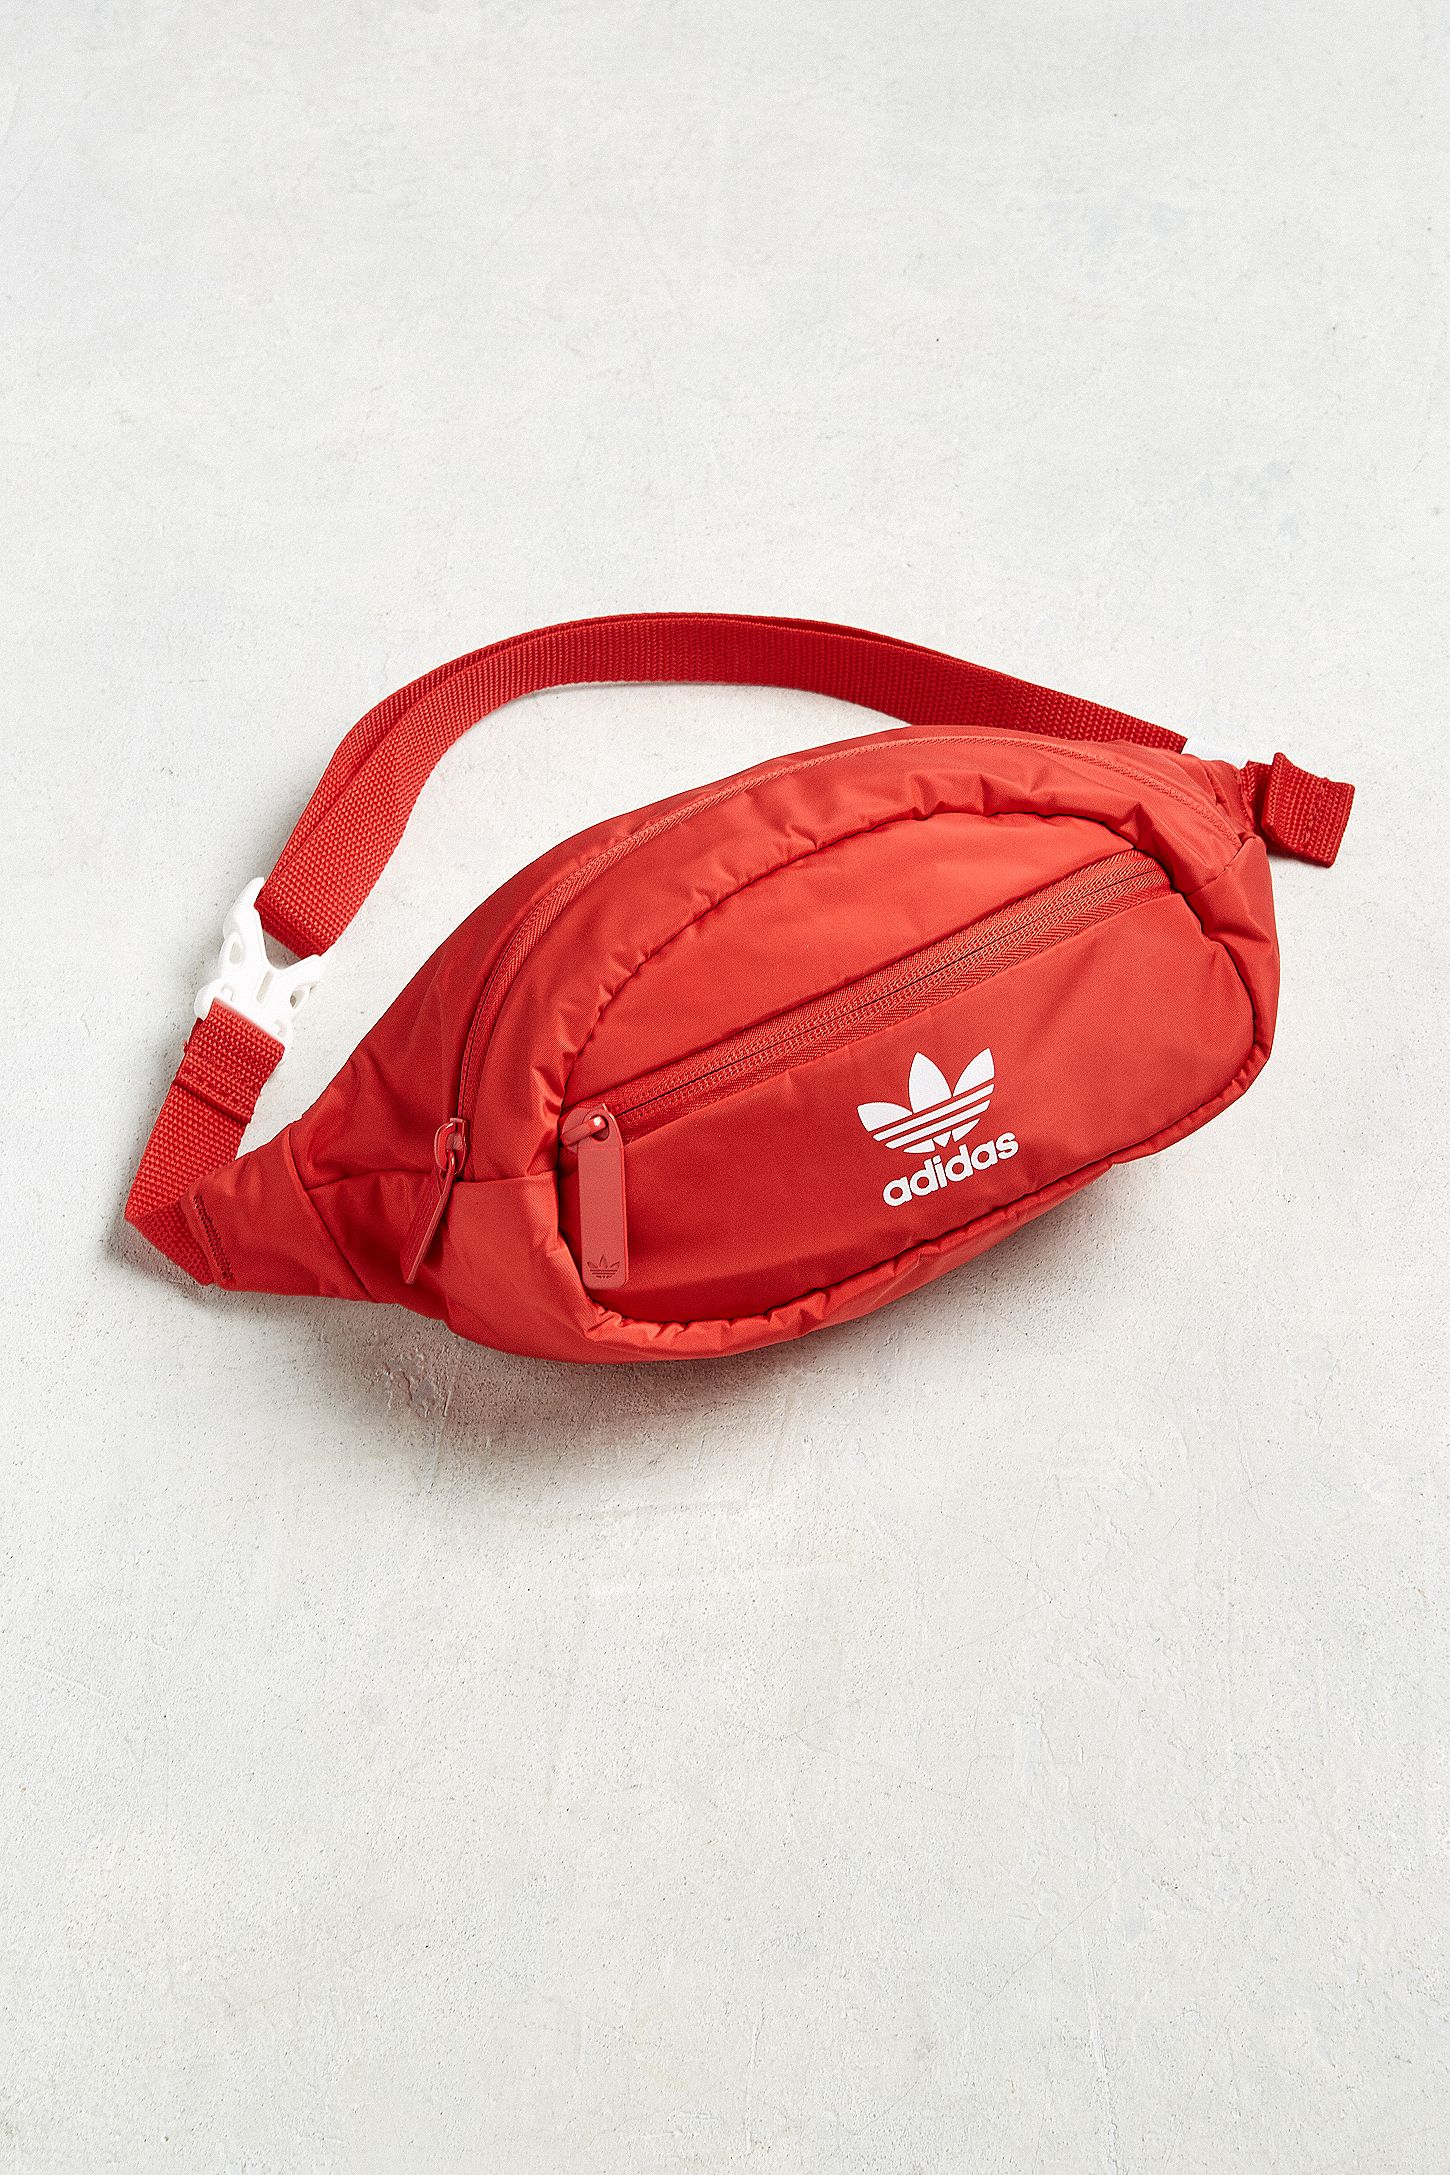 adidas alerts on Twitter: "Now available on @UrbanOutfitters. adidas  Trefoil Sling Bag. —&gt; https://t.co/Ppqu1RbAVe https://t.co/30fqGsdMDw" /  Twitter